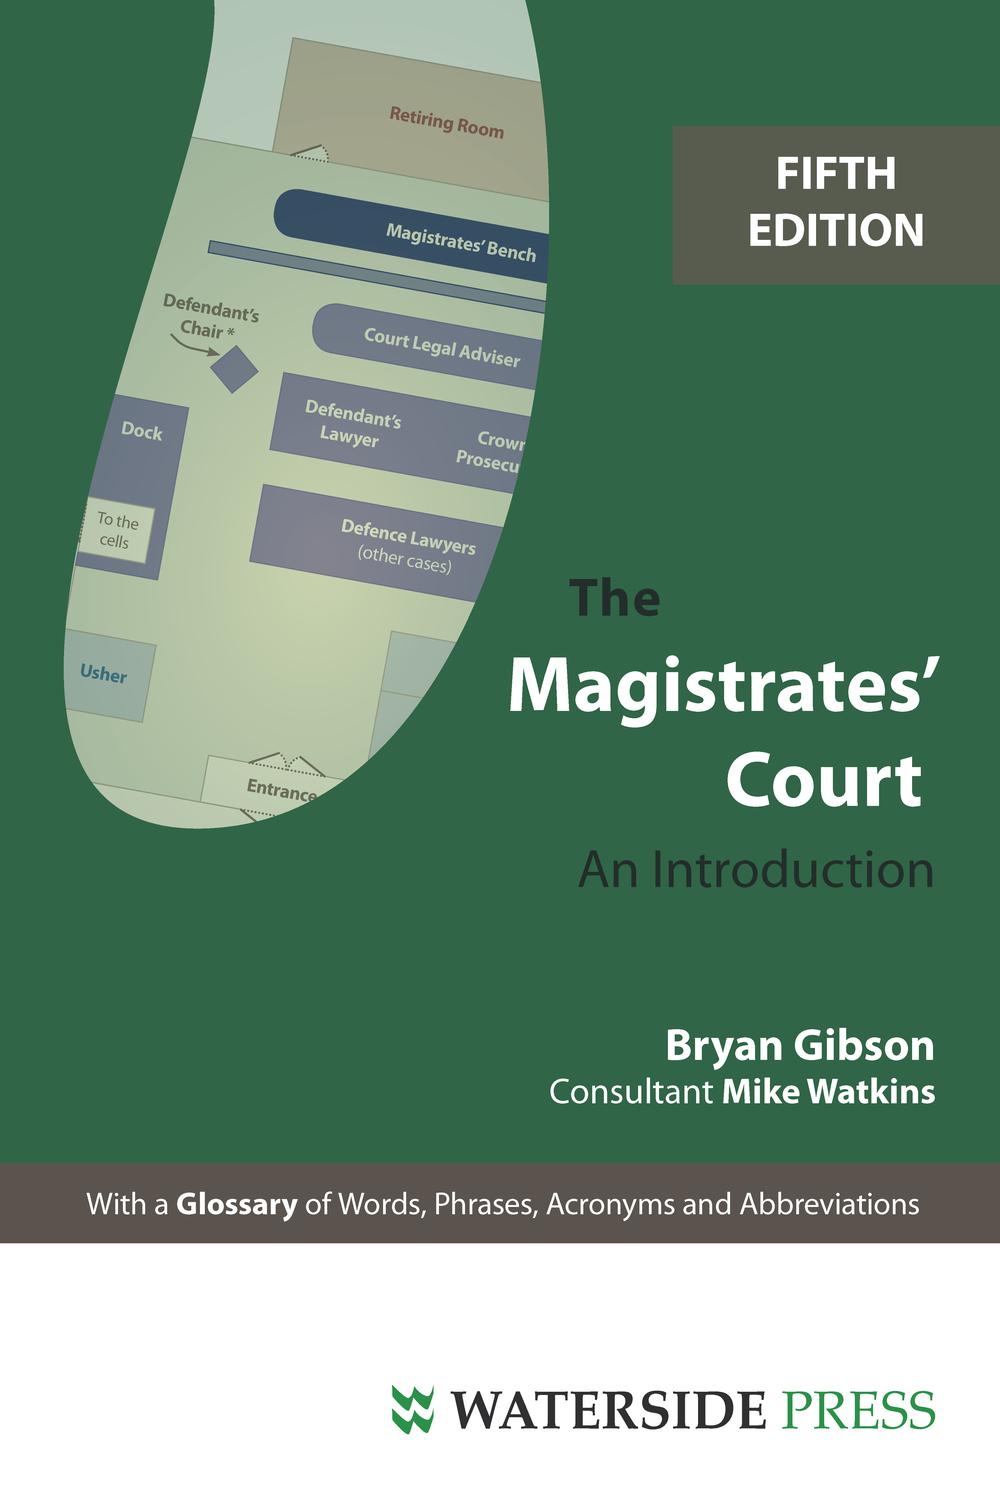 The Magistrates' Court - Gibson, Bryan, Watkins, Mike